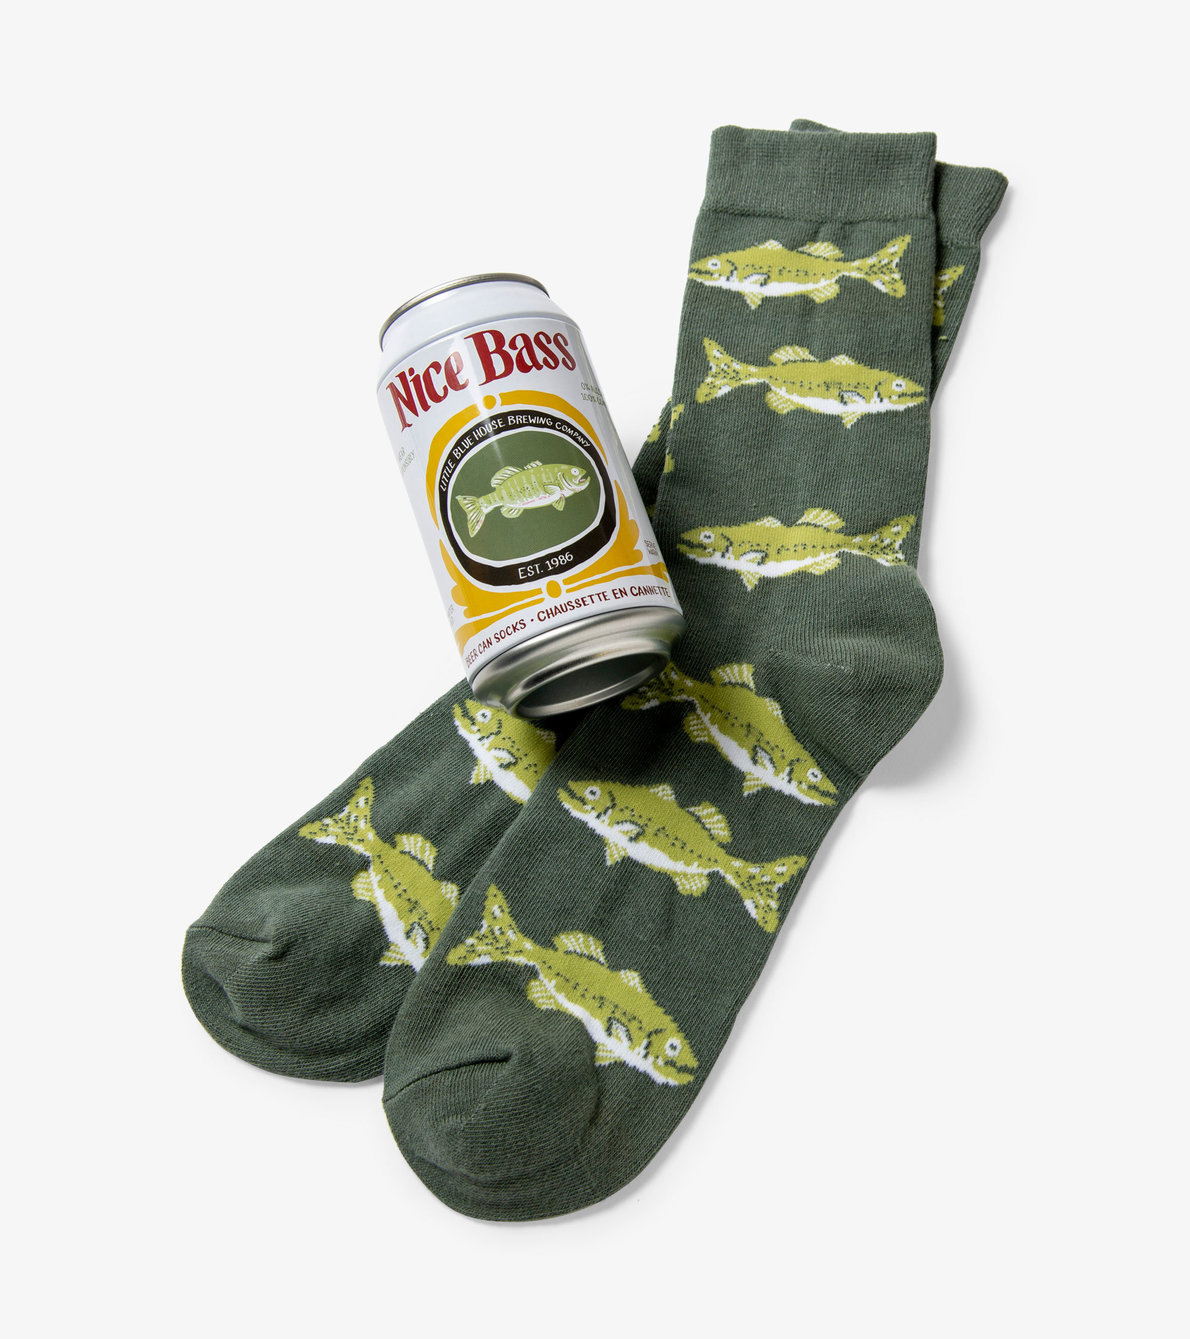 View larger image of Nice Bass Men's Beer Can Socks